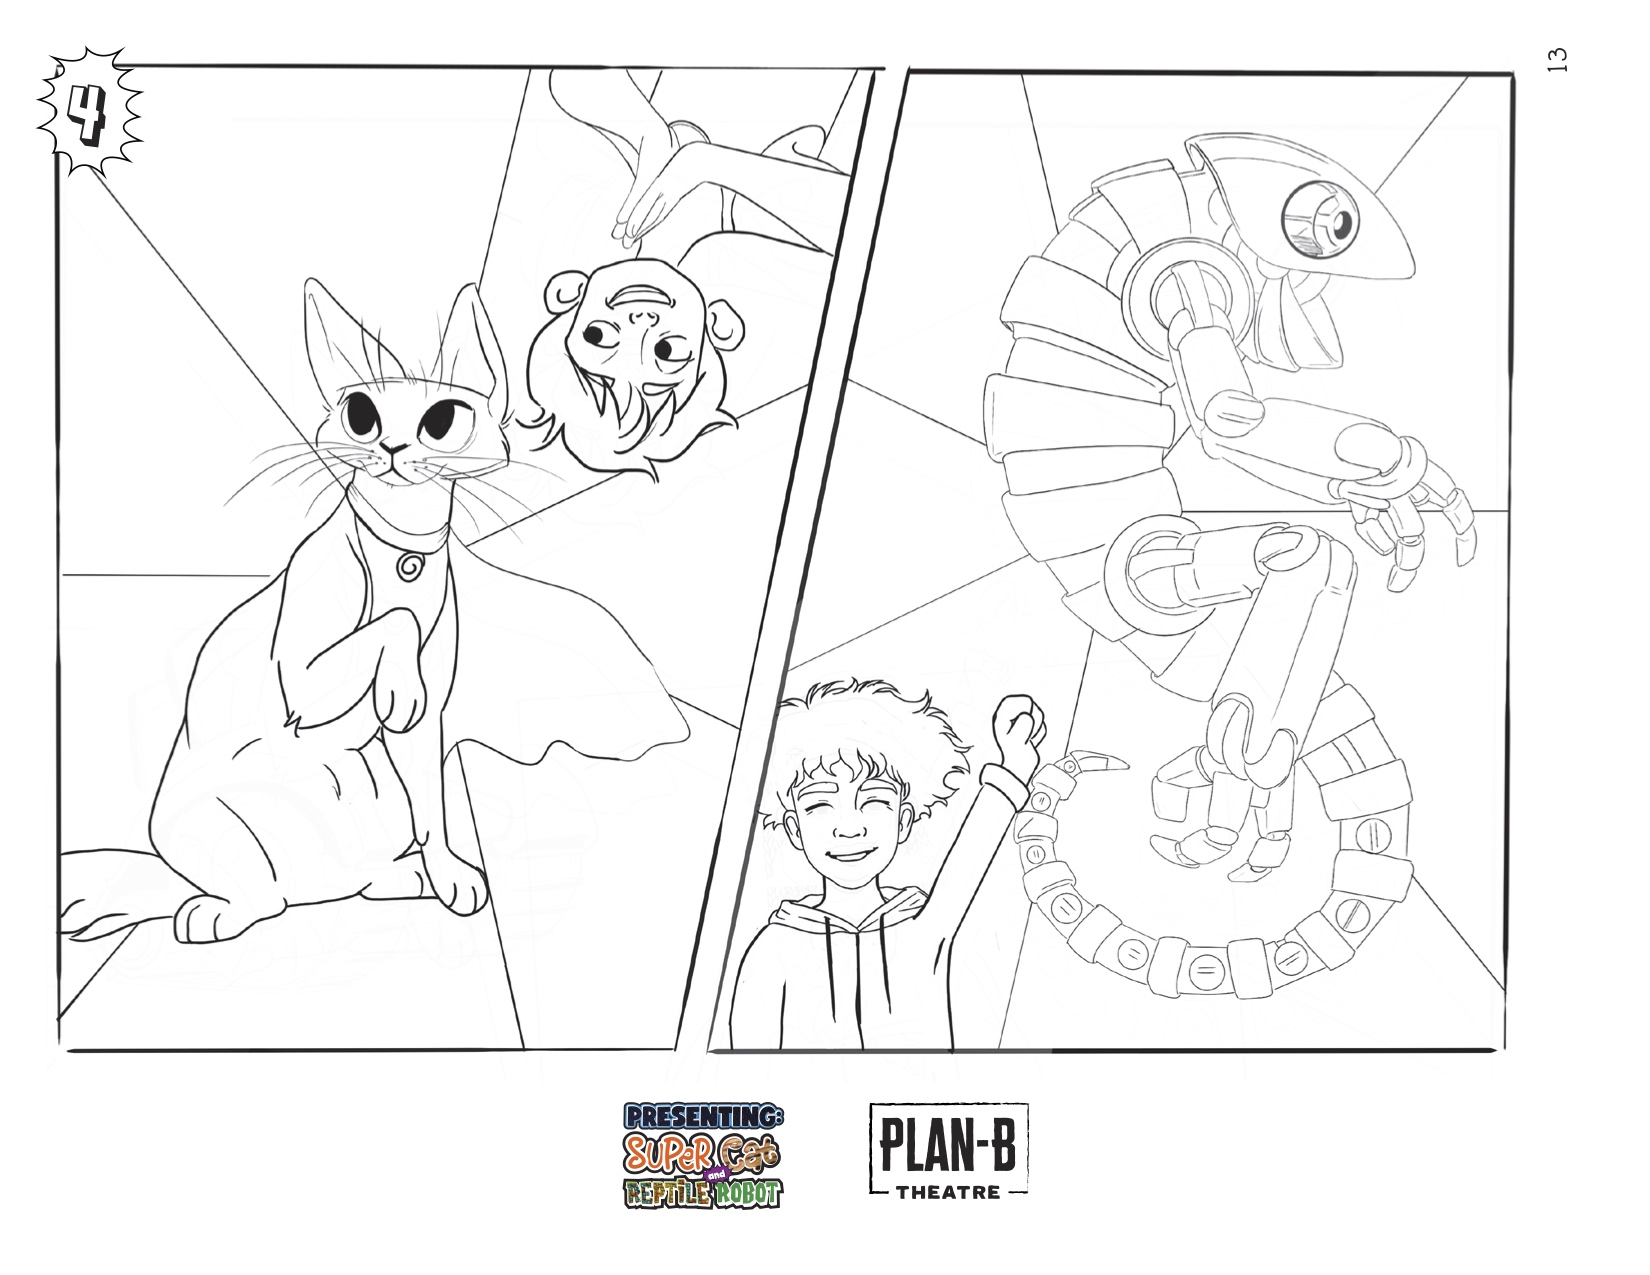 PRESENTING: SUPER CAT & REPTILE ROBOT coloring page with all male cast.